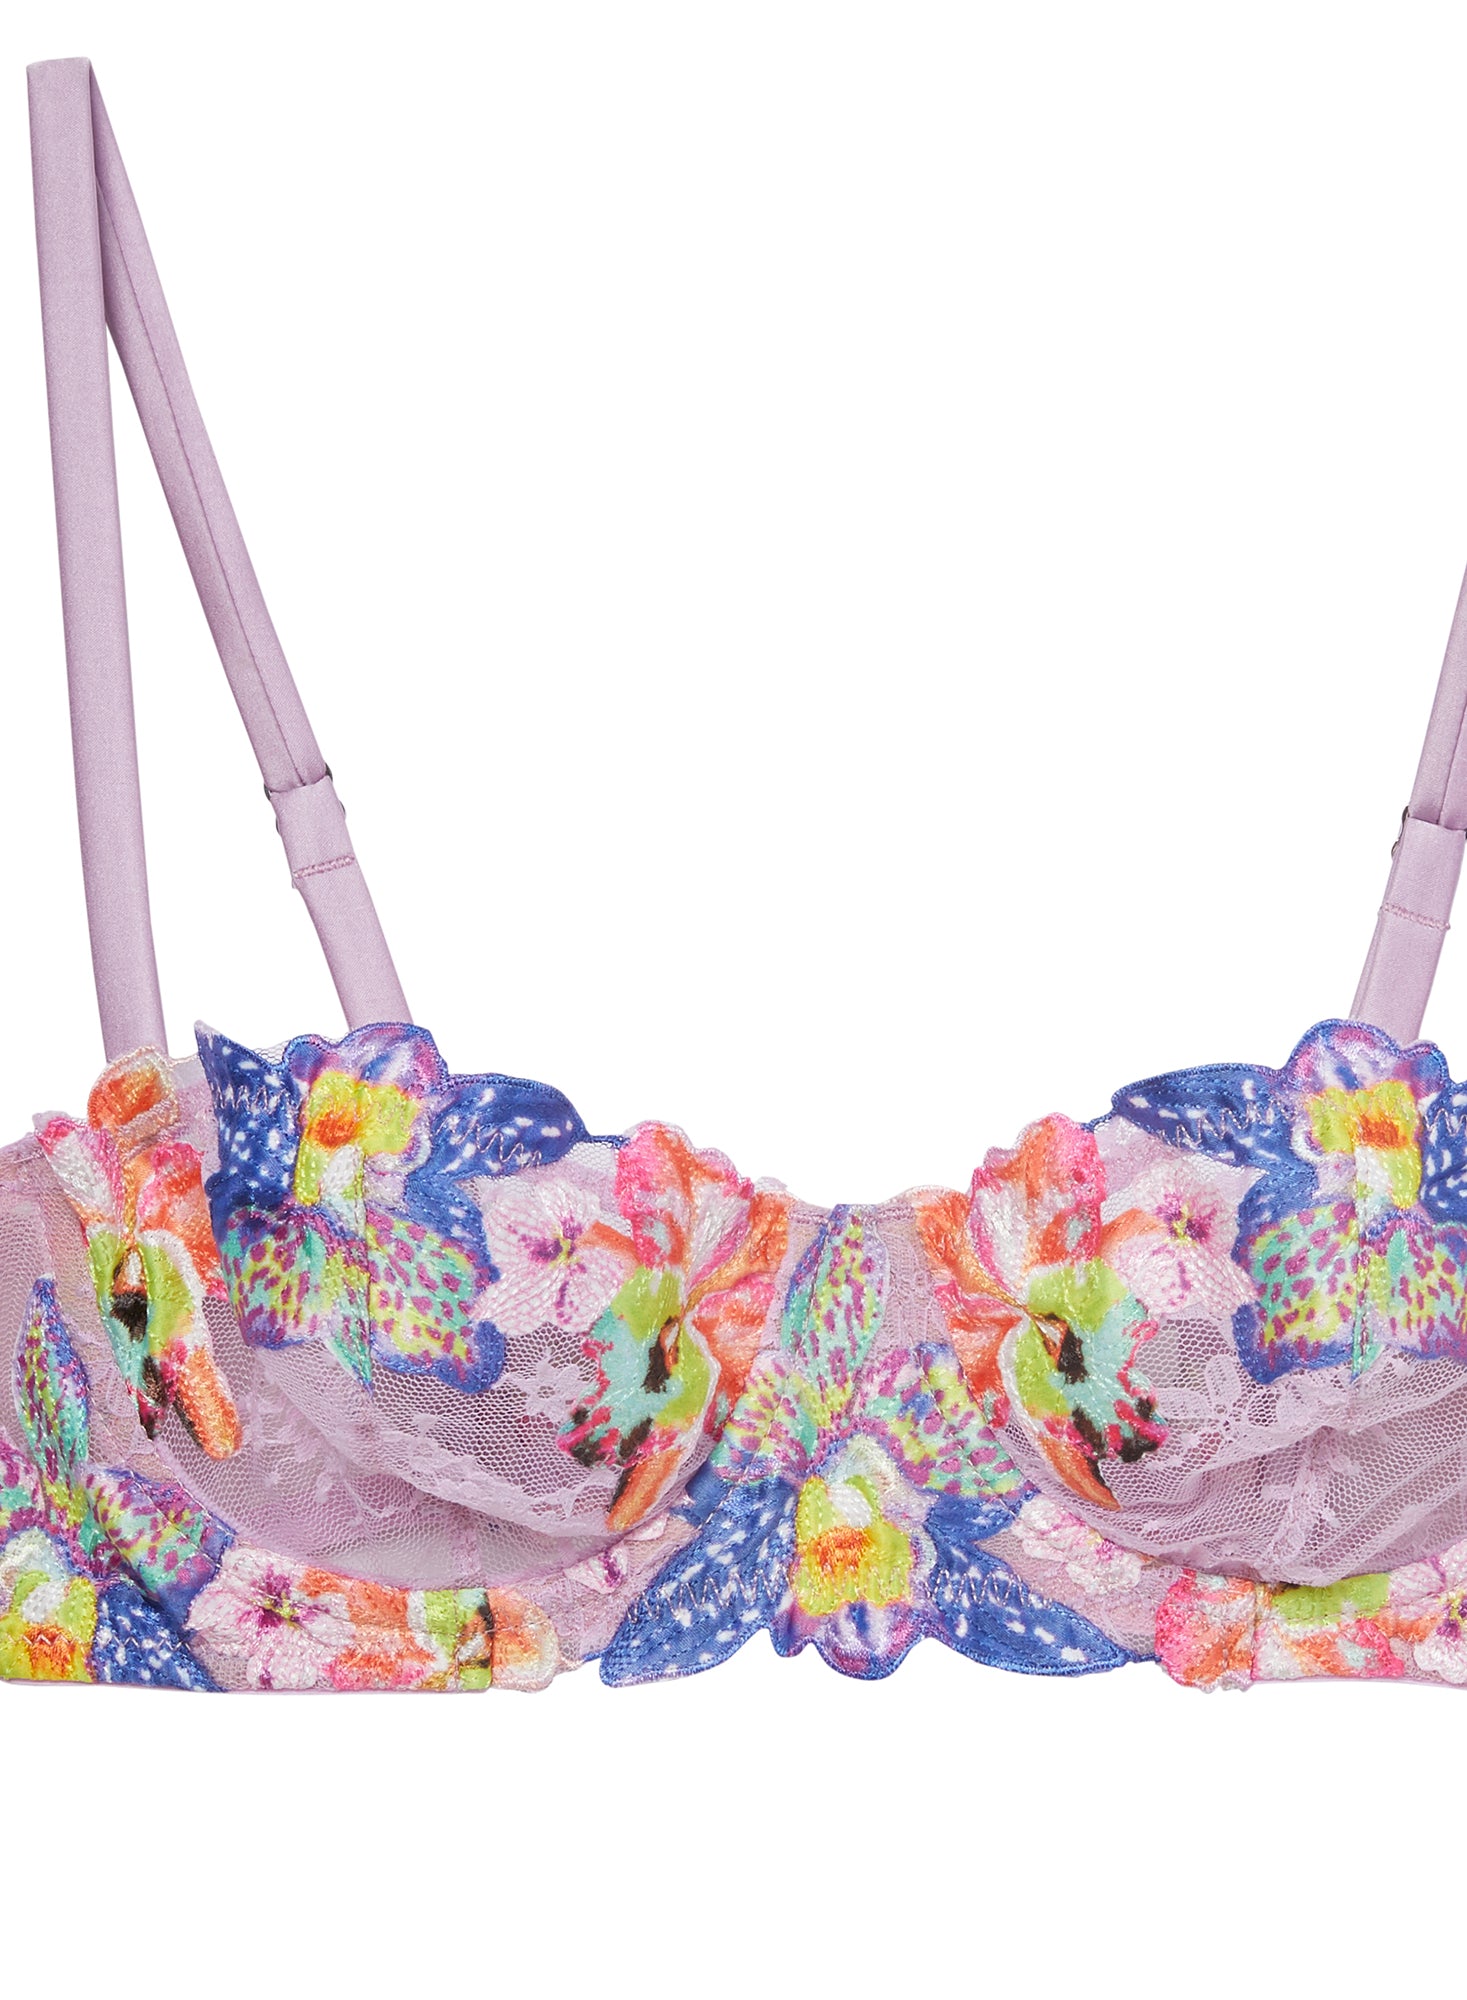 Unlined Balconette Bra - Pink Floral Embroidery